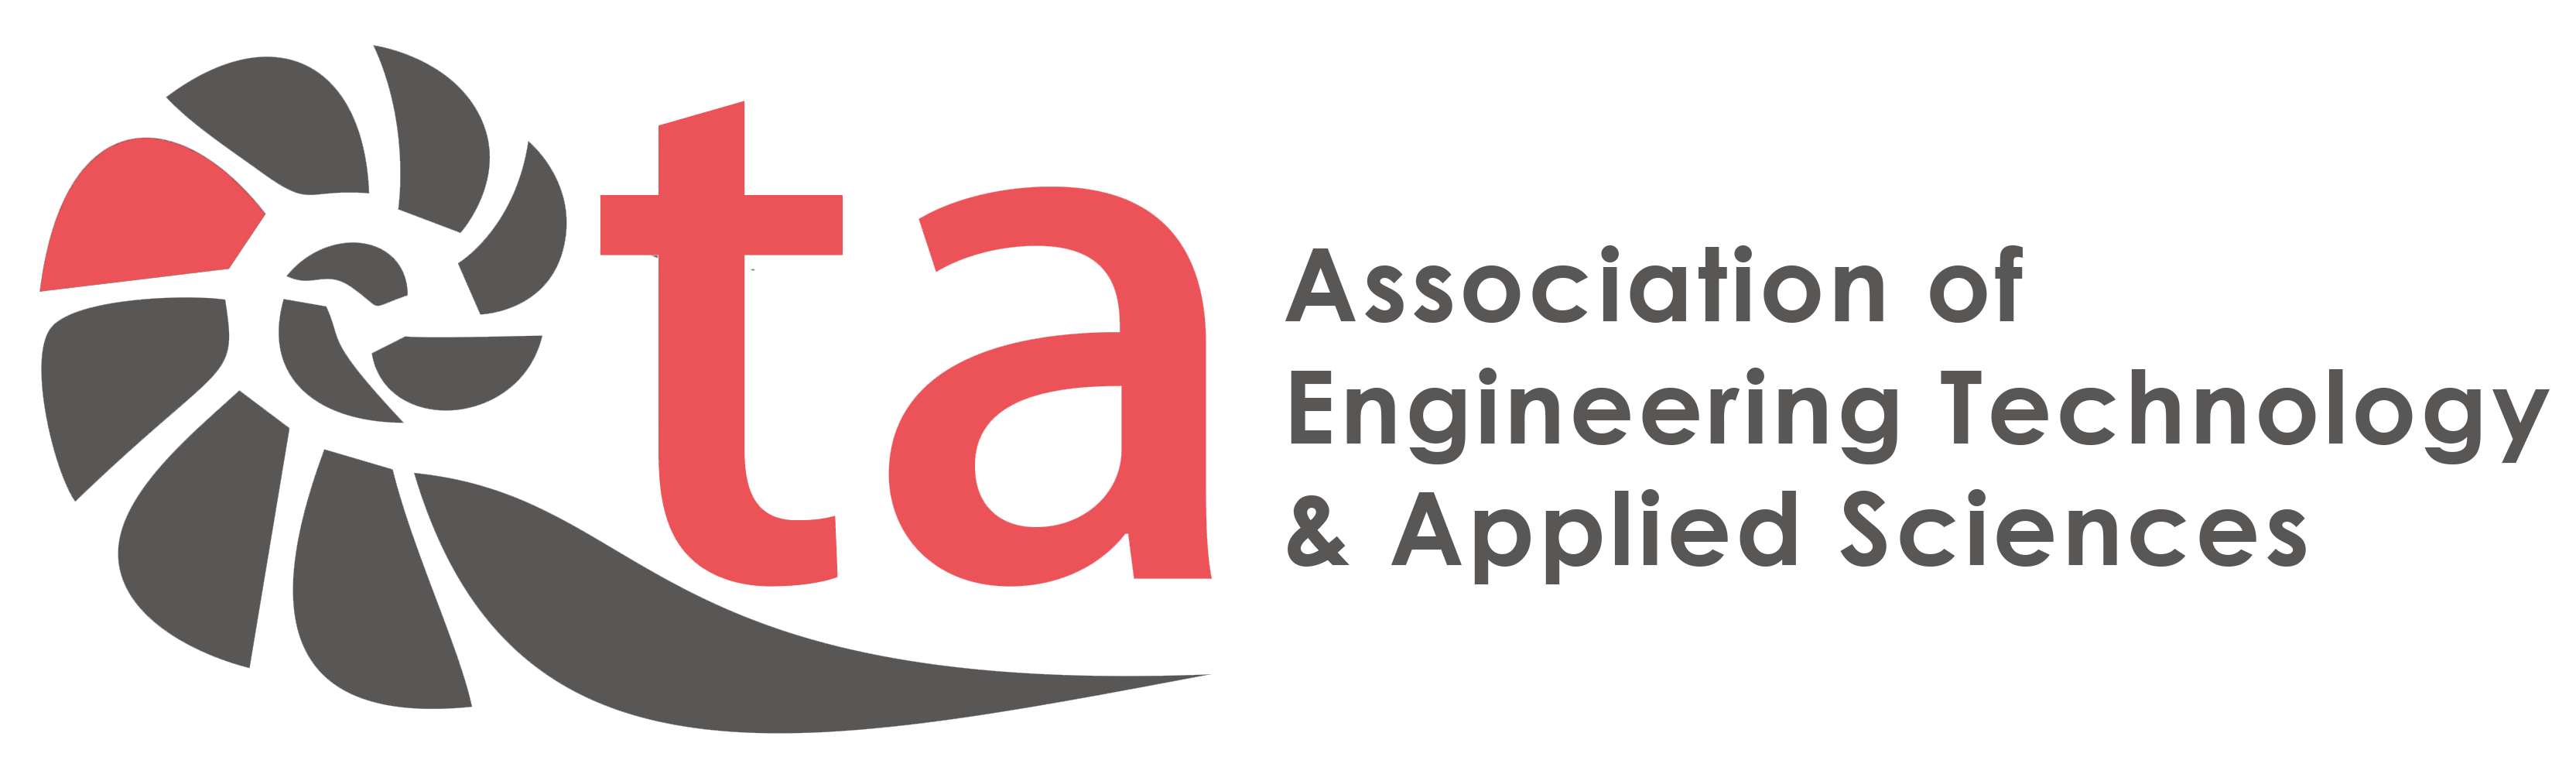 AETA 2nd International Conference on Emerging Research in Information Technology, Applied Sciences, Engineering & Computing EIAE